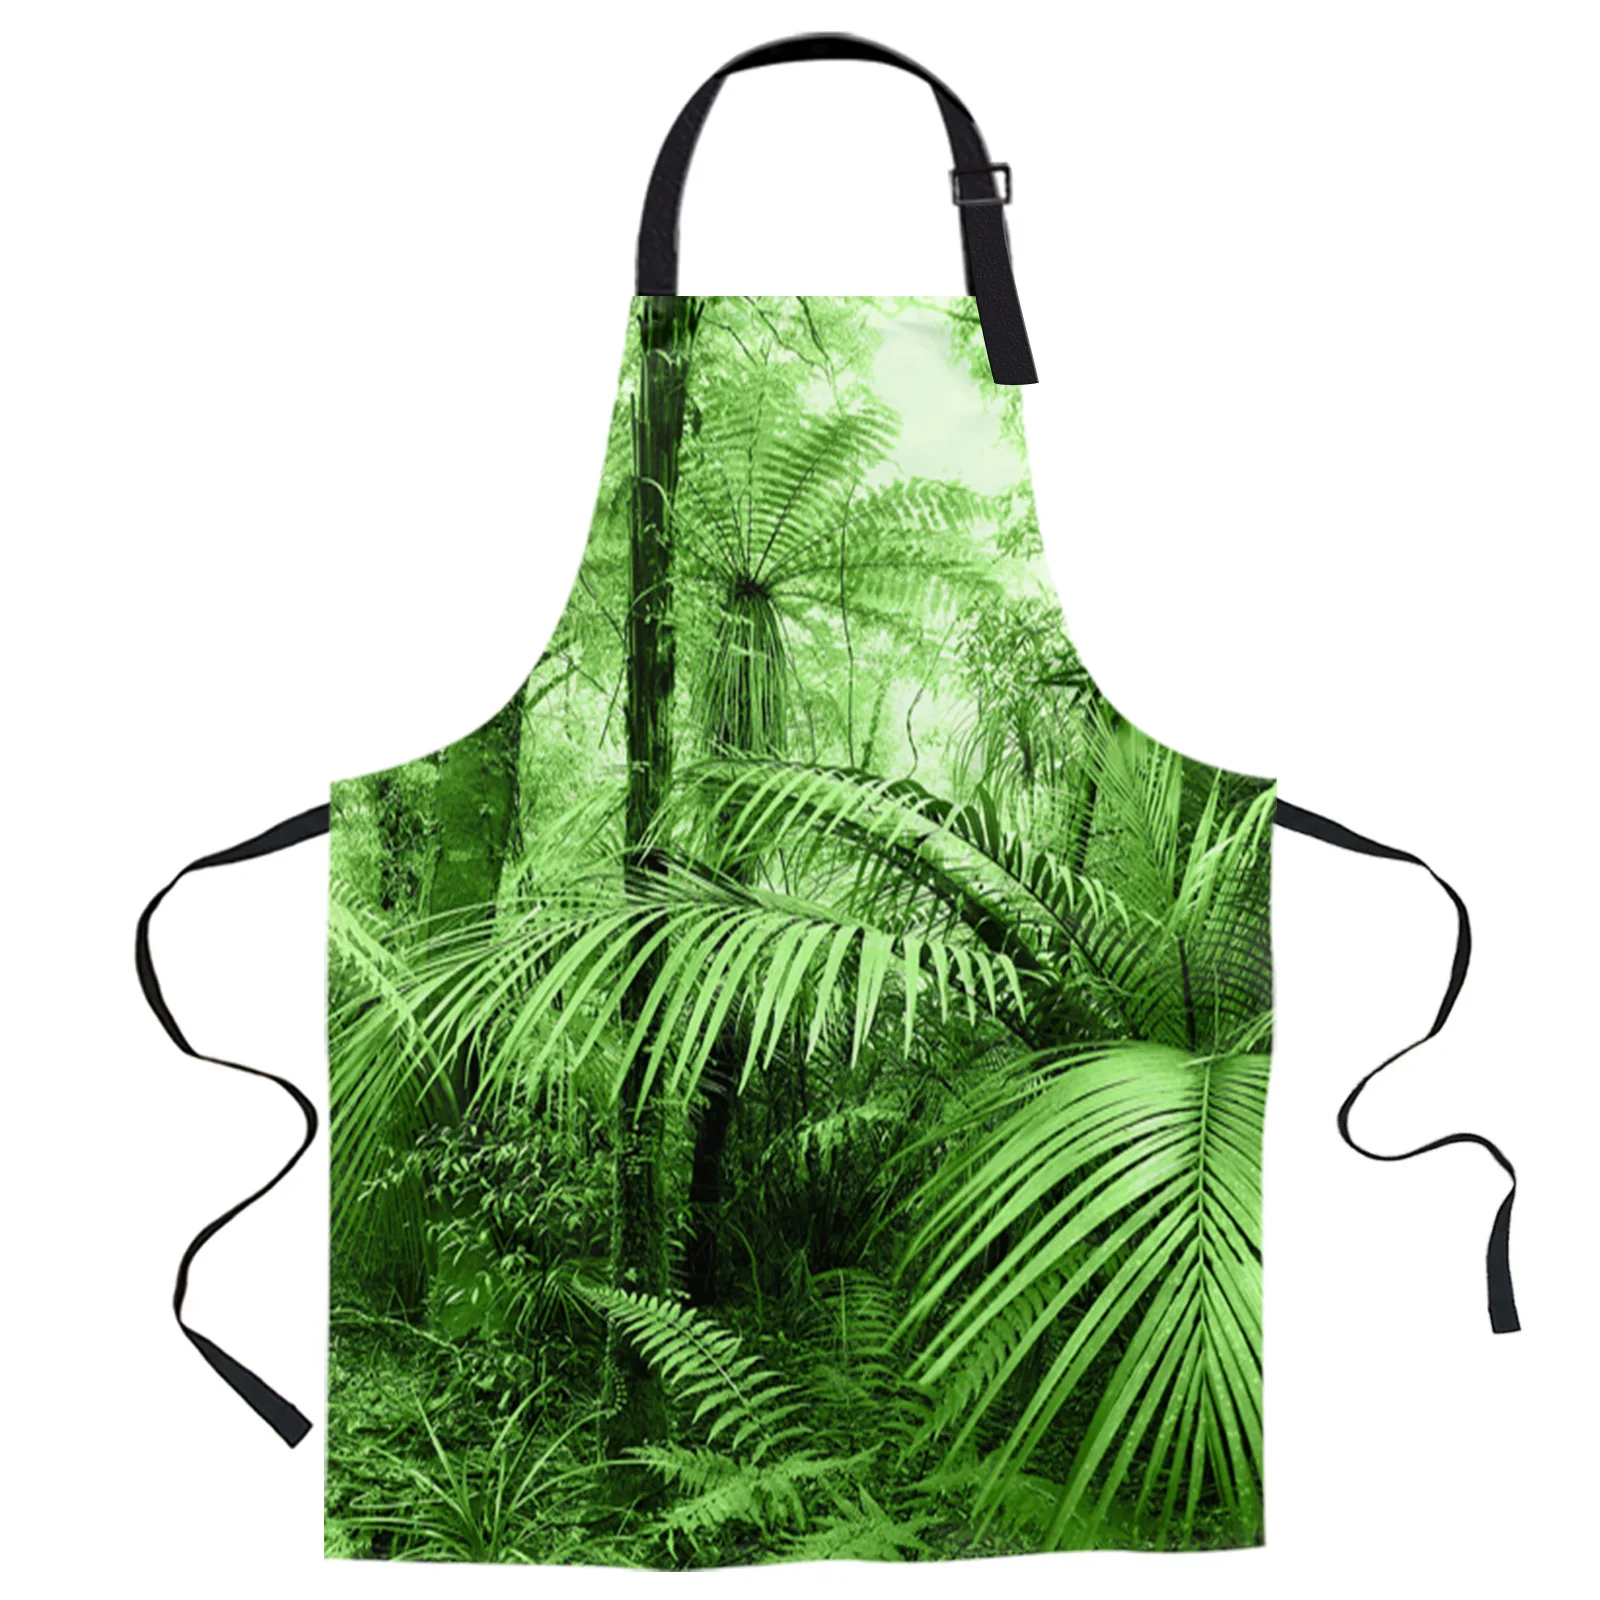 

Green Jungle Forest Scenery Aprons for Women Men Kid Cooking Baking Apron Kitchen Utility Equipment Accessories